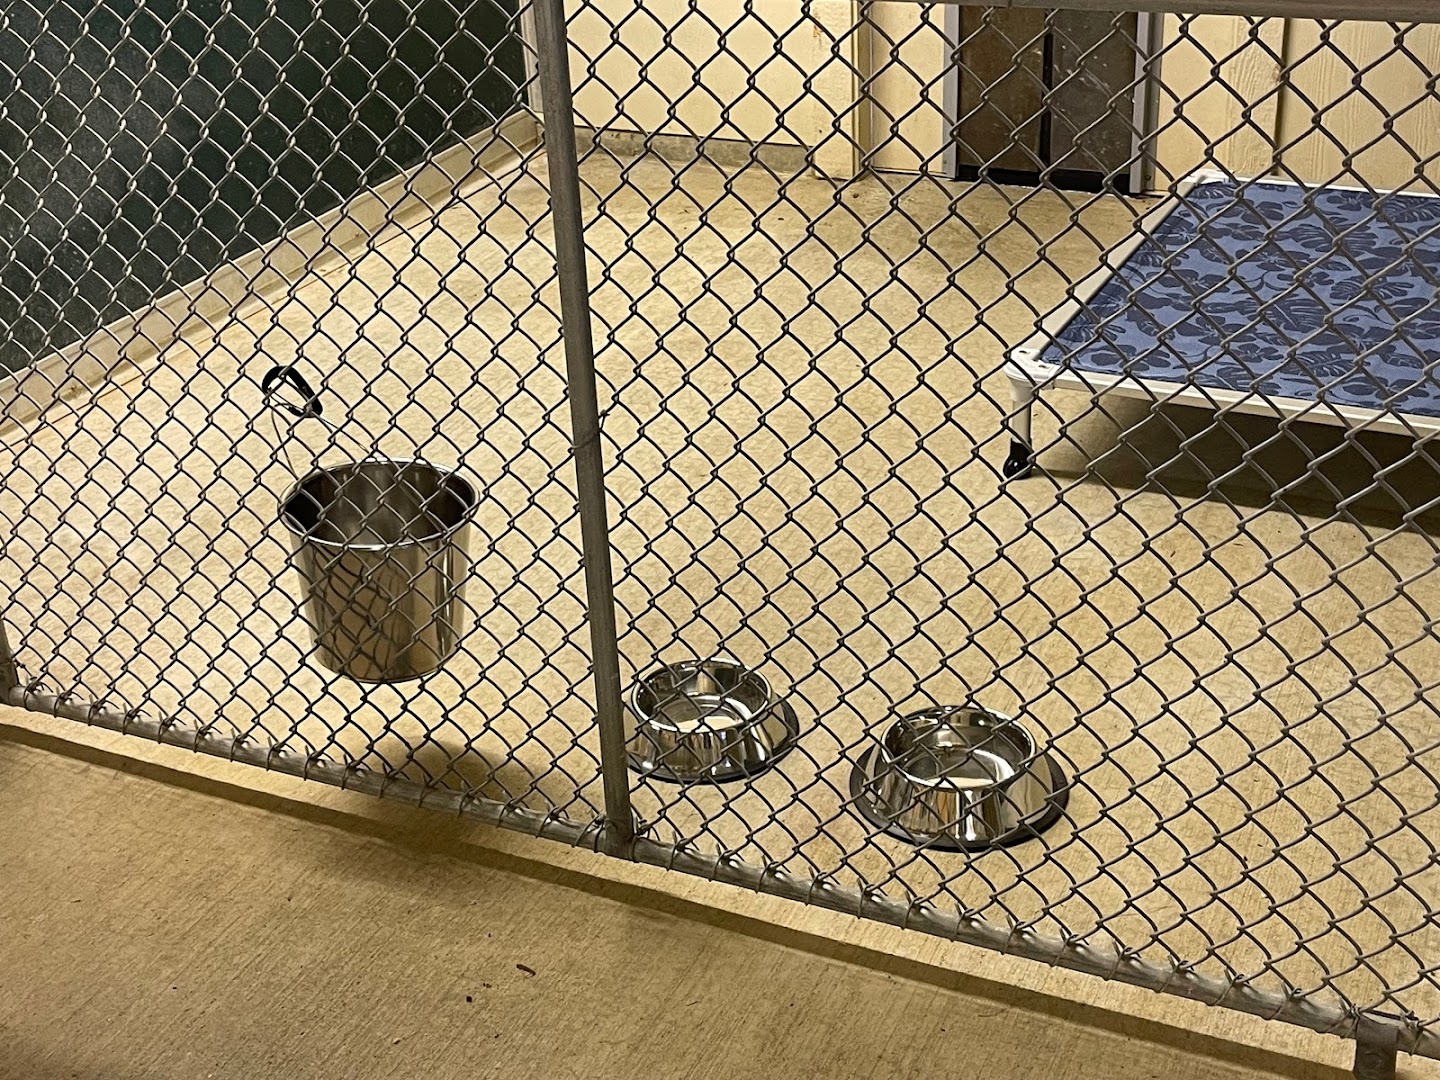 The Kennels at Choco Ranch